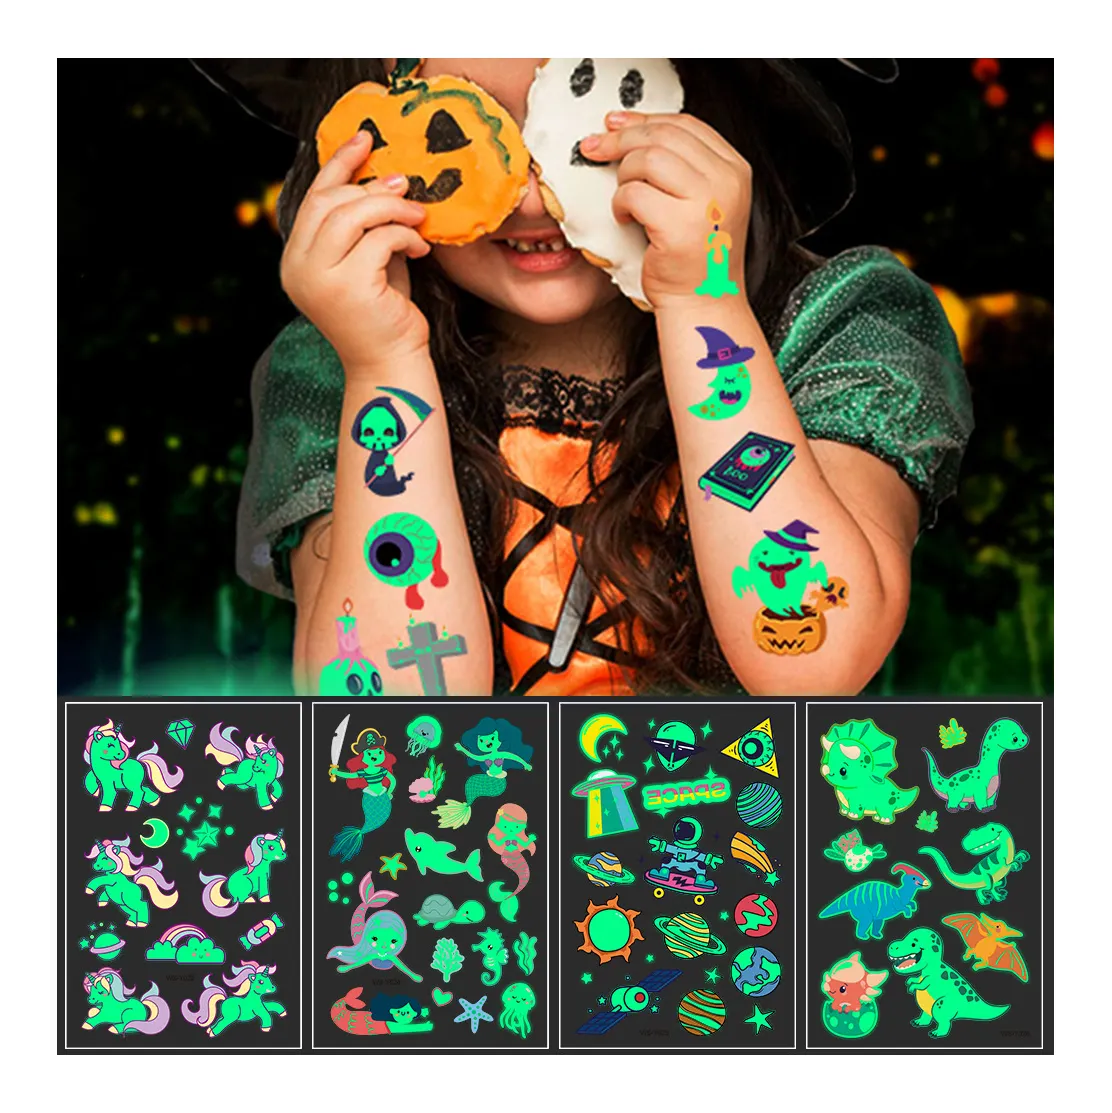 Hot Selling Non-toxic Luminous Tattoo Stickers Glow In Dark Waterproof Cartoon Temporary Tattoos For Kids Face Hand Body Arms